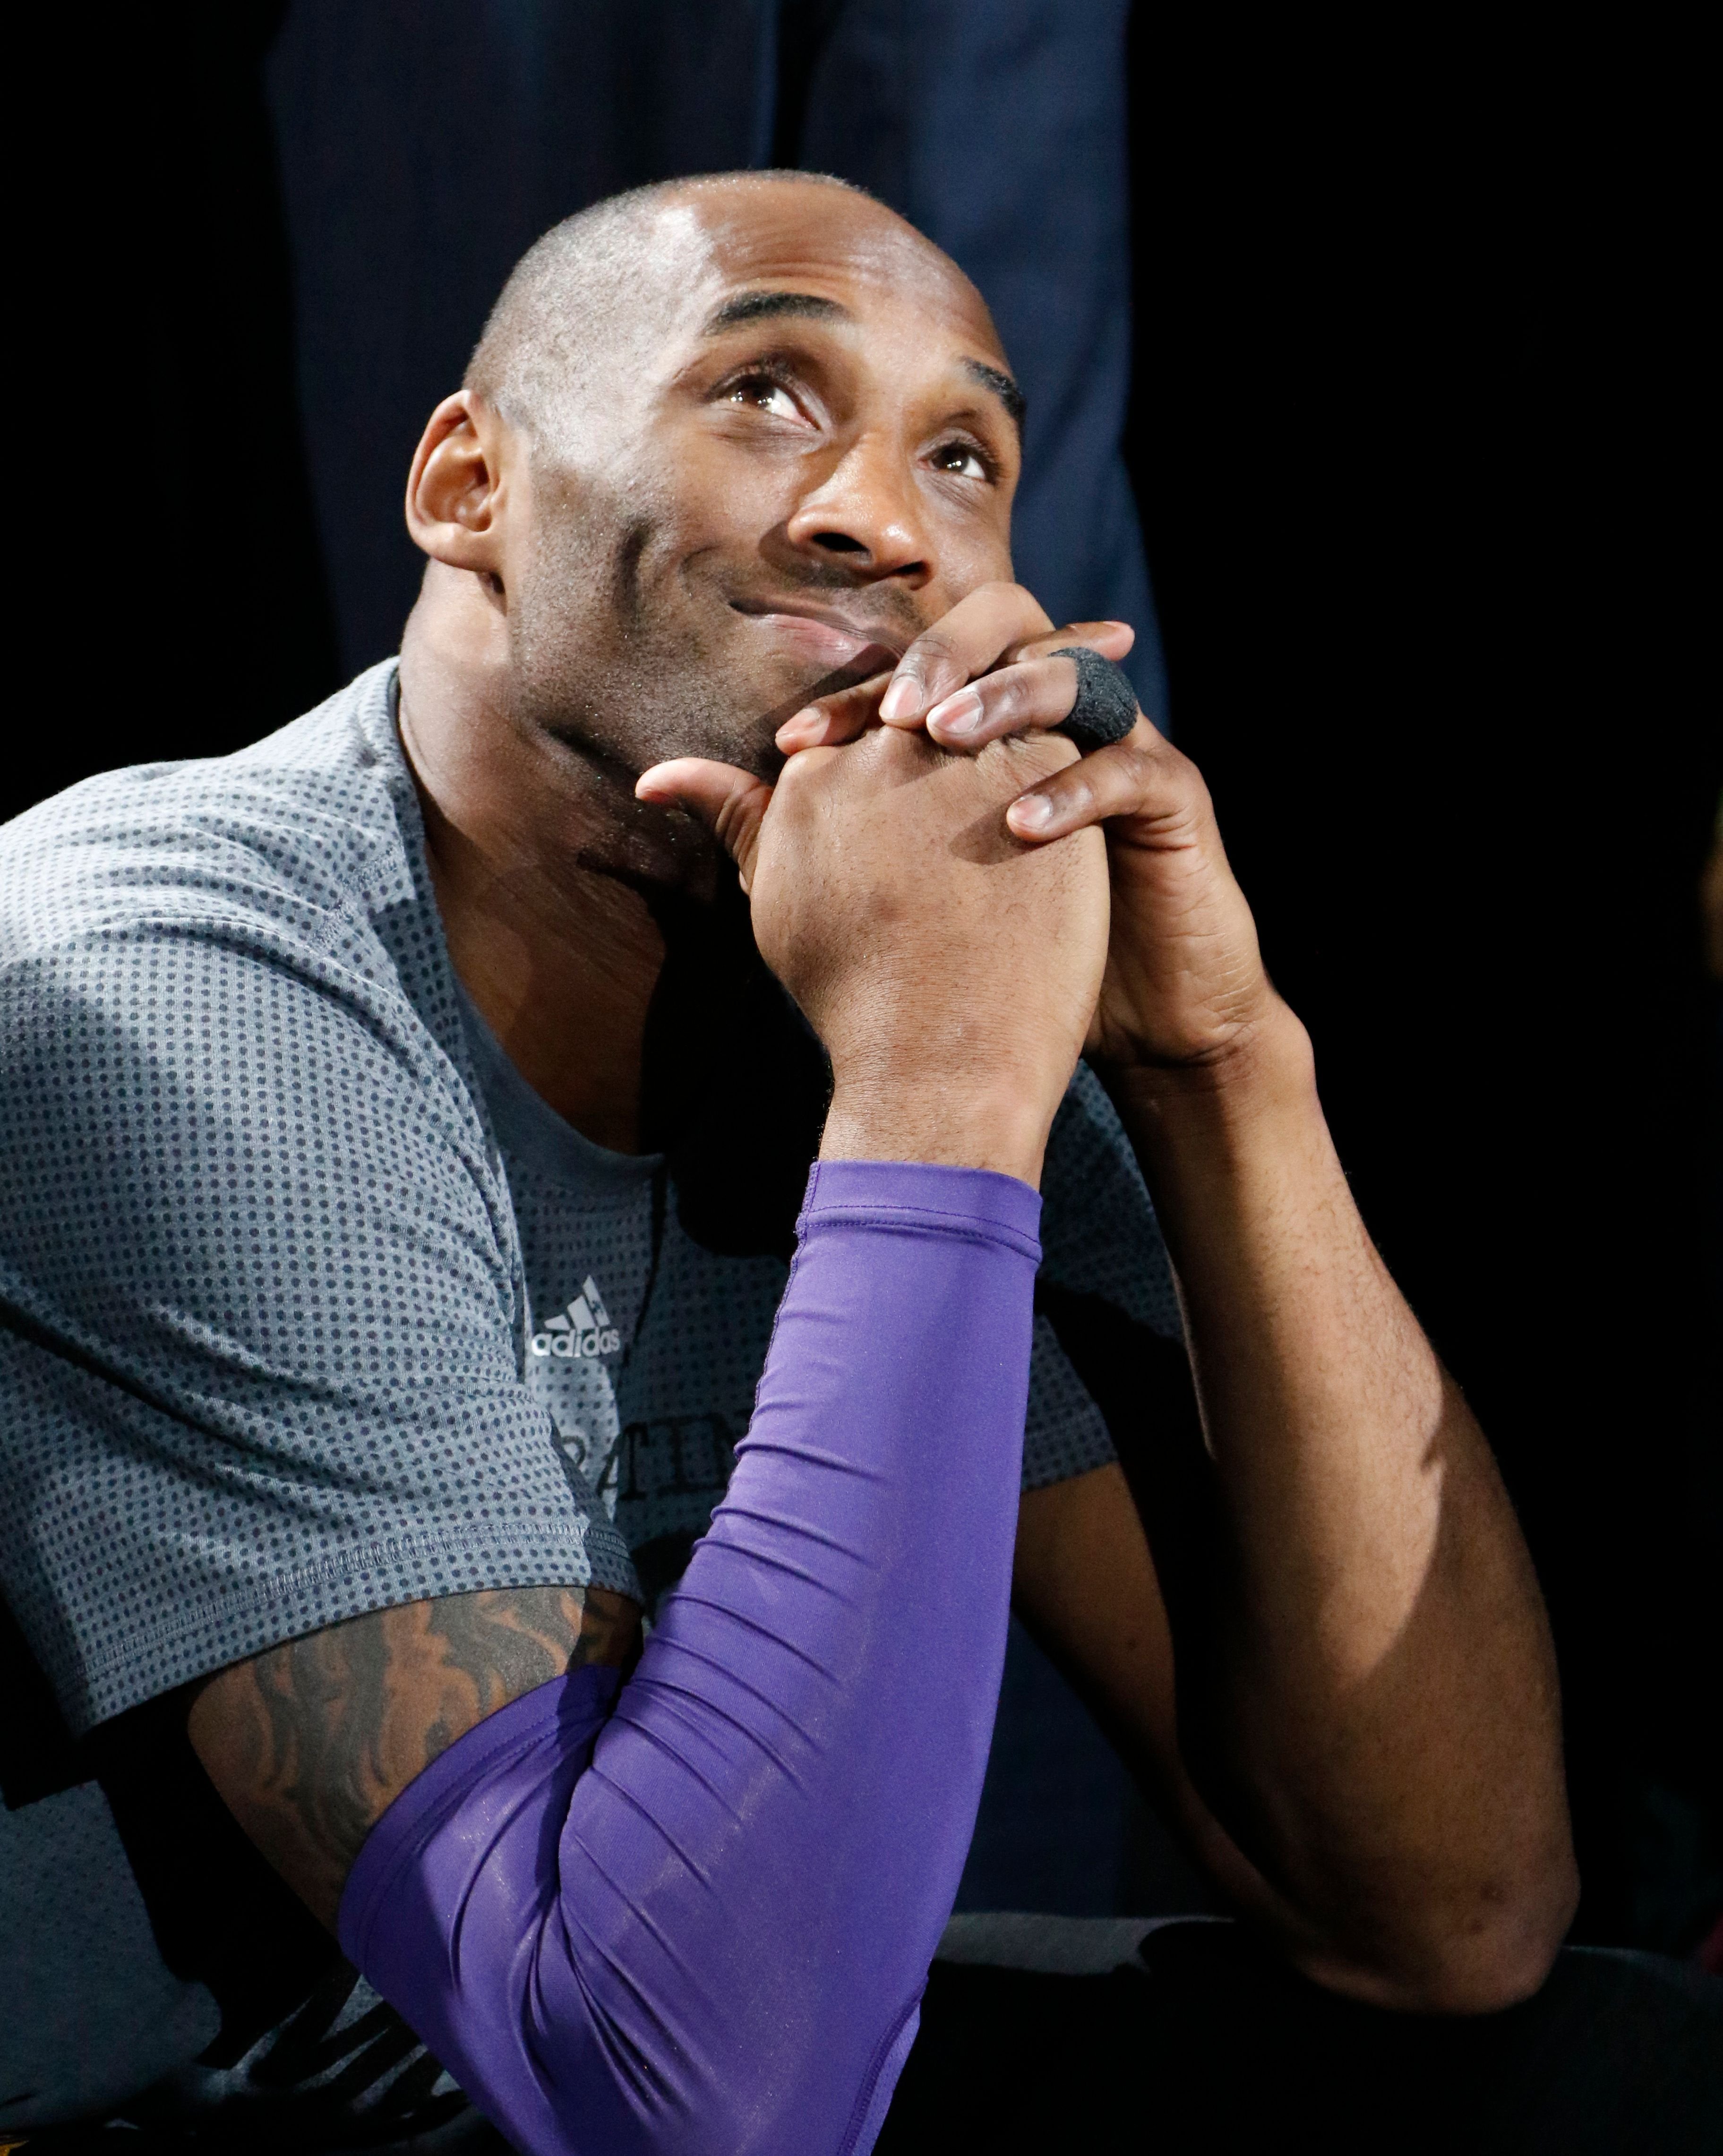 Kobe Bryant at AT&T Center on February 6, 2016 in San Antonio, Texas. | Source: Getty Images